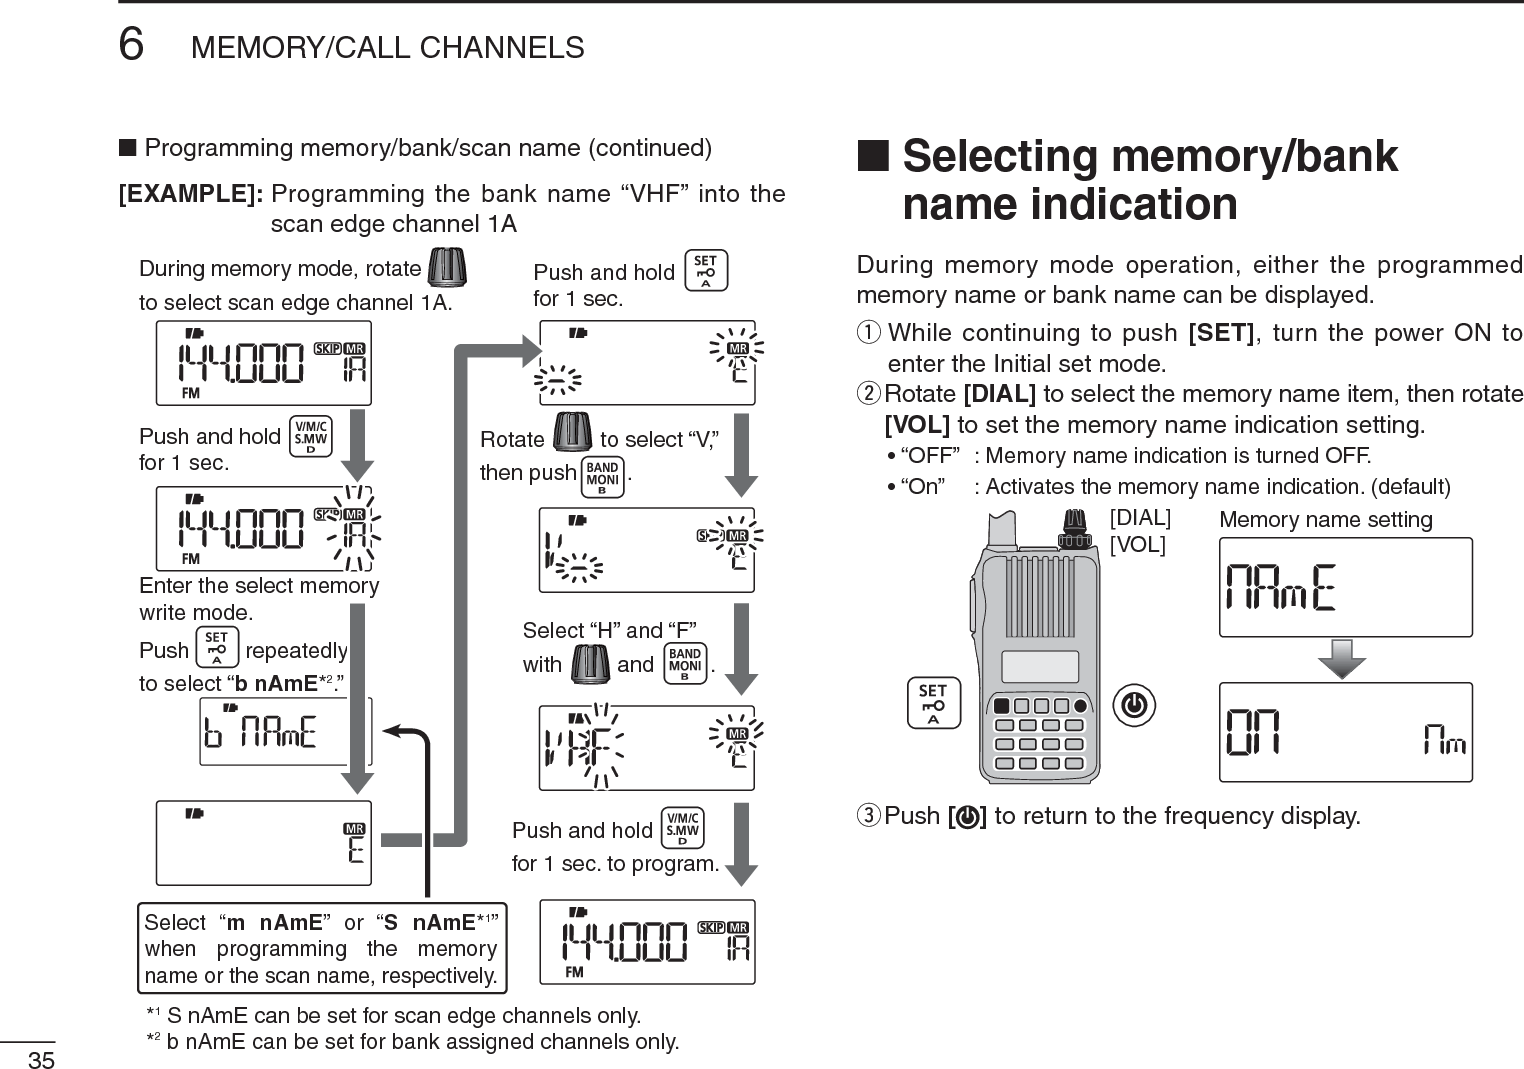 356MEMORY/CALL CHANNELSNProgramming memory/bank/scan name (continued)[EXAMPLE]: Programming the bank name “VHF” into the scan edge channel 1ANSelecting memory/bank name indicationDuring memory mode operation, either the programmed memory name or bank name can be displayed.q  While continuing to push [SET], turn the power ON to enter the Initial set mode.w  Rotate [DIAL] to select the memory name item, then rotate [VOL] to set the memory name indication setting.• “OFF” : Memory name indication is turned OFF.• “On”    : Activates the memory name indication. (default)[VOL][DIAL] Memory name settinge  Push [ ] to return to the frequency display.Push and holdfor 1 sec.Push and holdfor 1 sec.Enter the select memorywrite mode.Push         repeatedlyto select “b nAmE*2.”Push and holdfor 1 sec. to program.During memory mode, rotateto select scan edge channel 1A.Rotate         to select “V,”then push .Select “H” and “F”with         and .*1 S nAmE can be set for scan edge channels only.*2 b nAmE can be set for bank assigned channels only.Select “m nAmE” or “S nAmE*1” when programming the memoryname or the scan name, respectively.